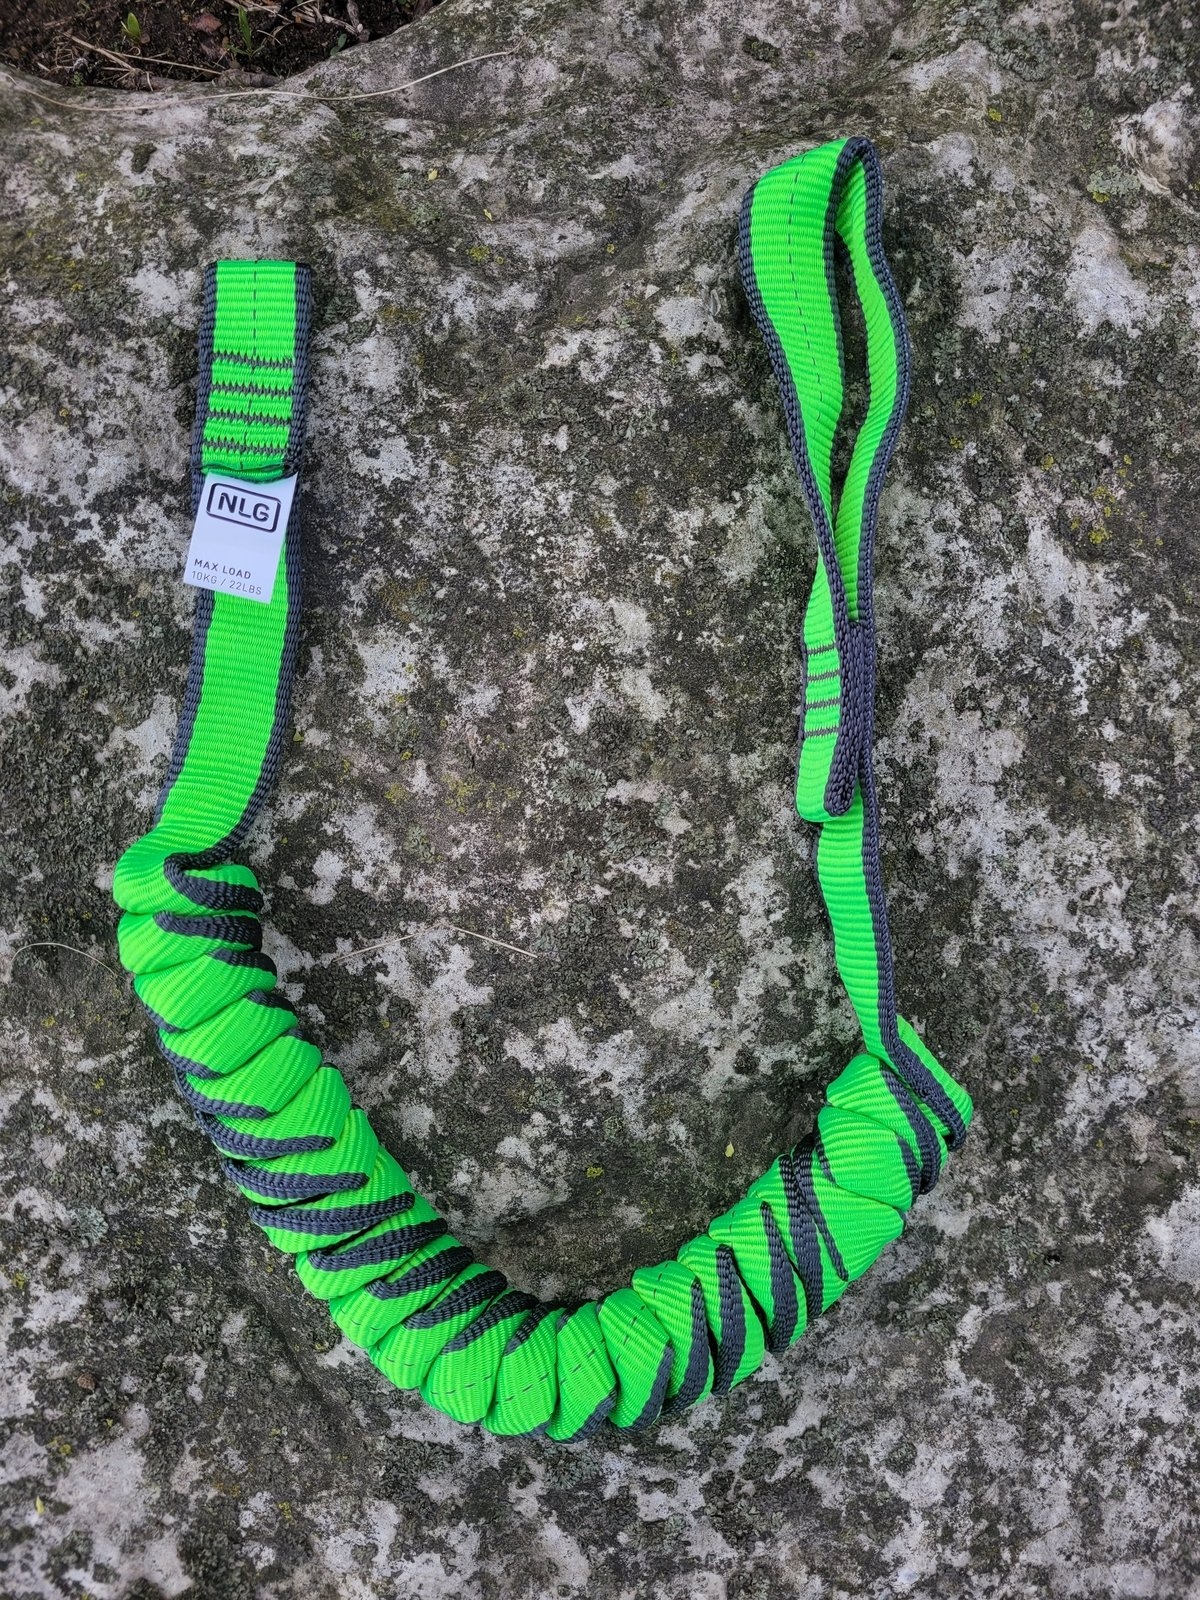 NLG Chainsaw Lanyard - Super Bungee